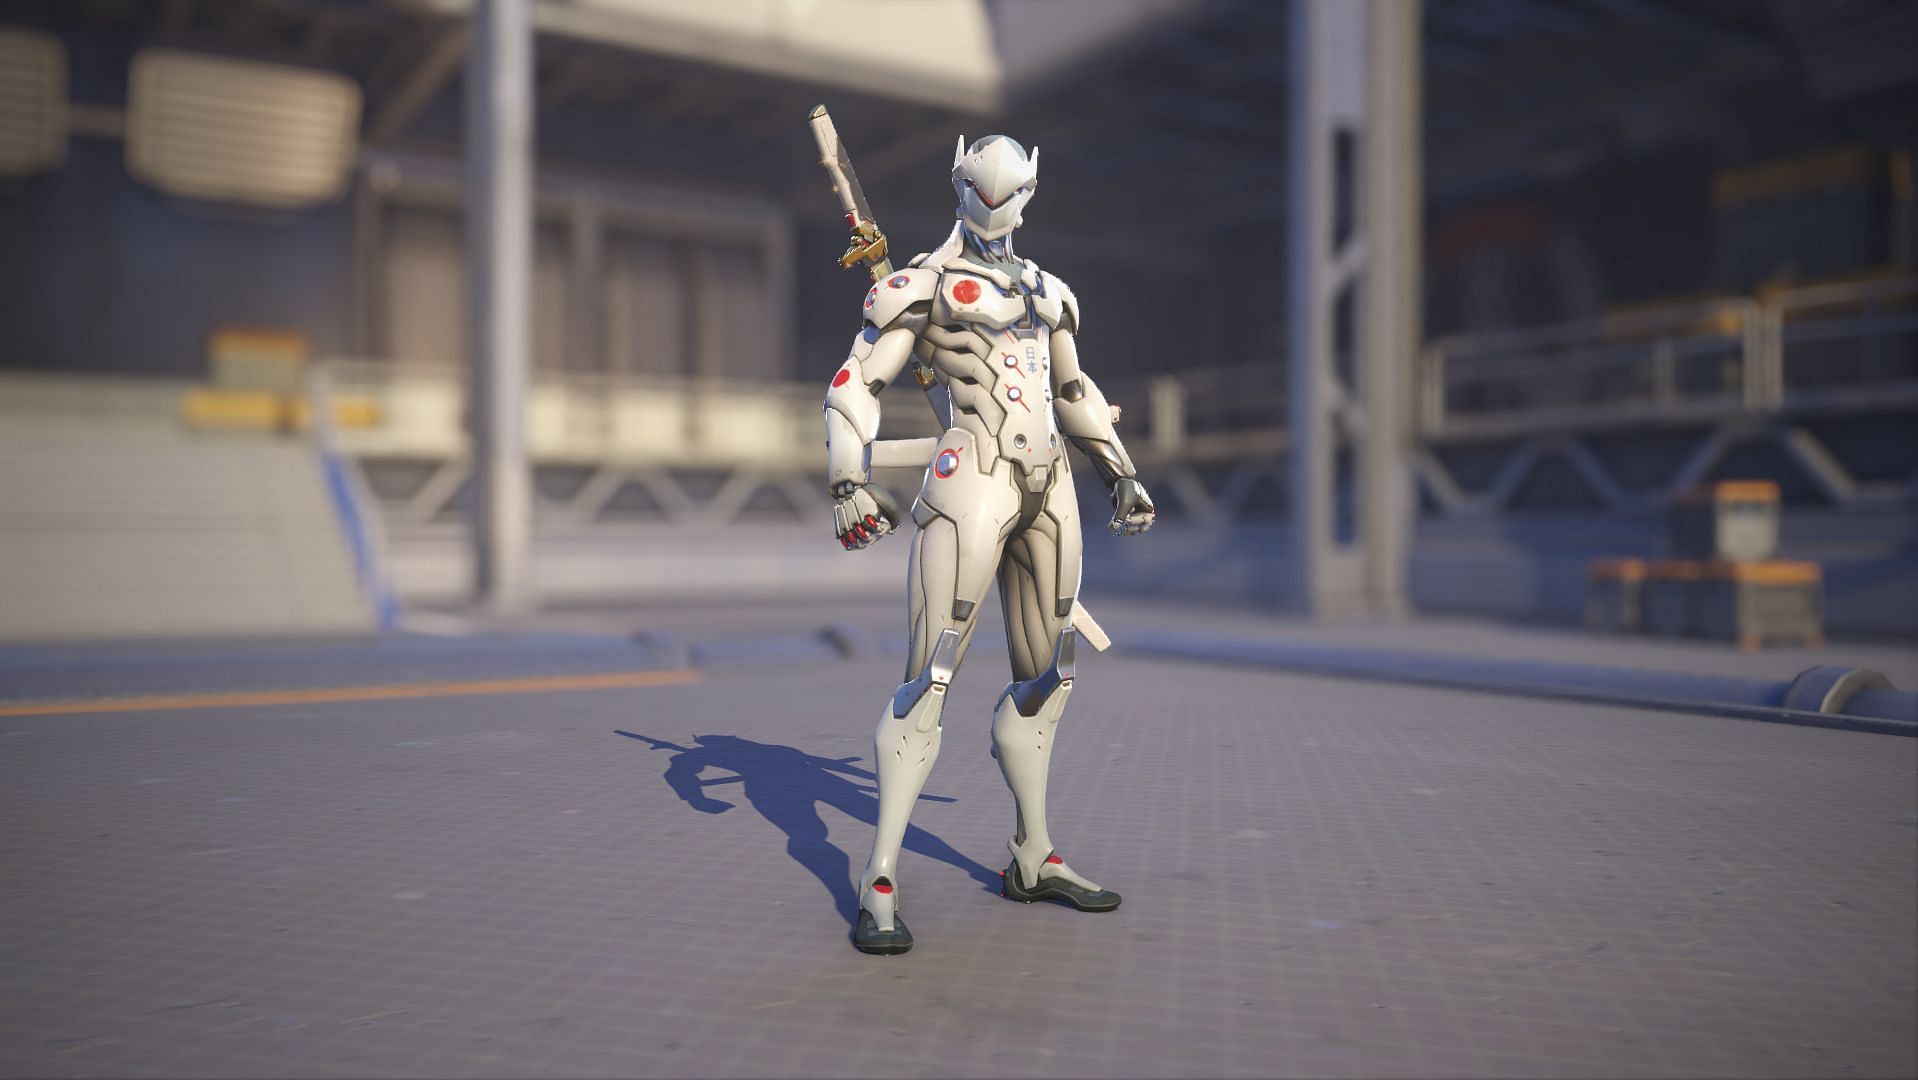 Nihon skin as seen in Overwatch 2 (Image via Blizzard Entertainment)